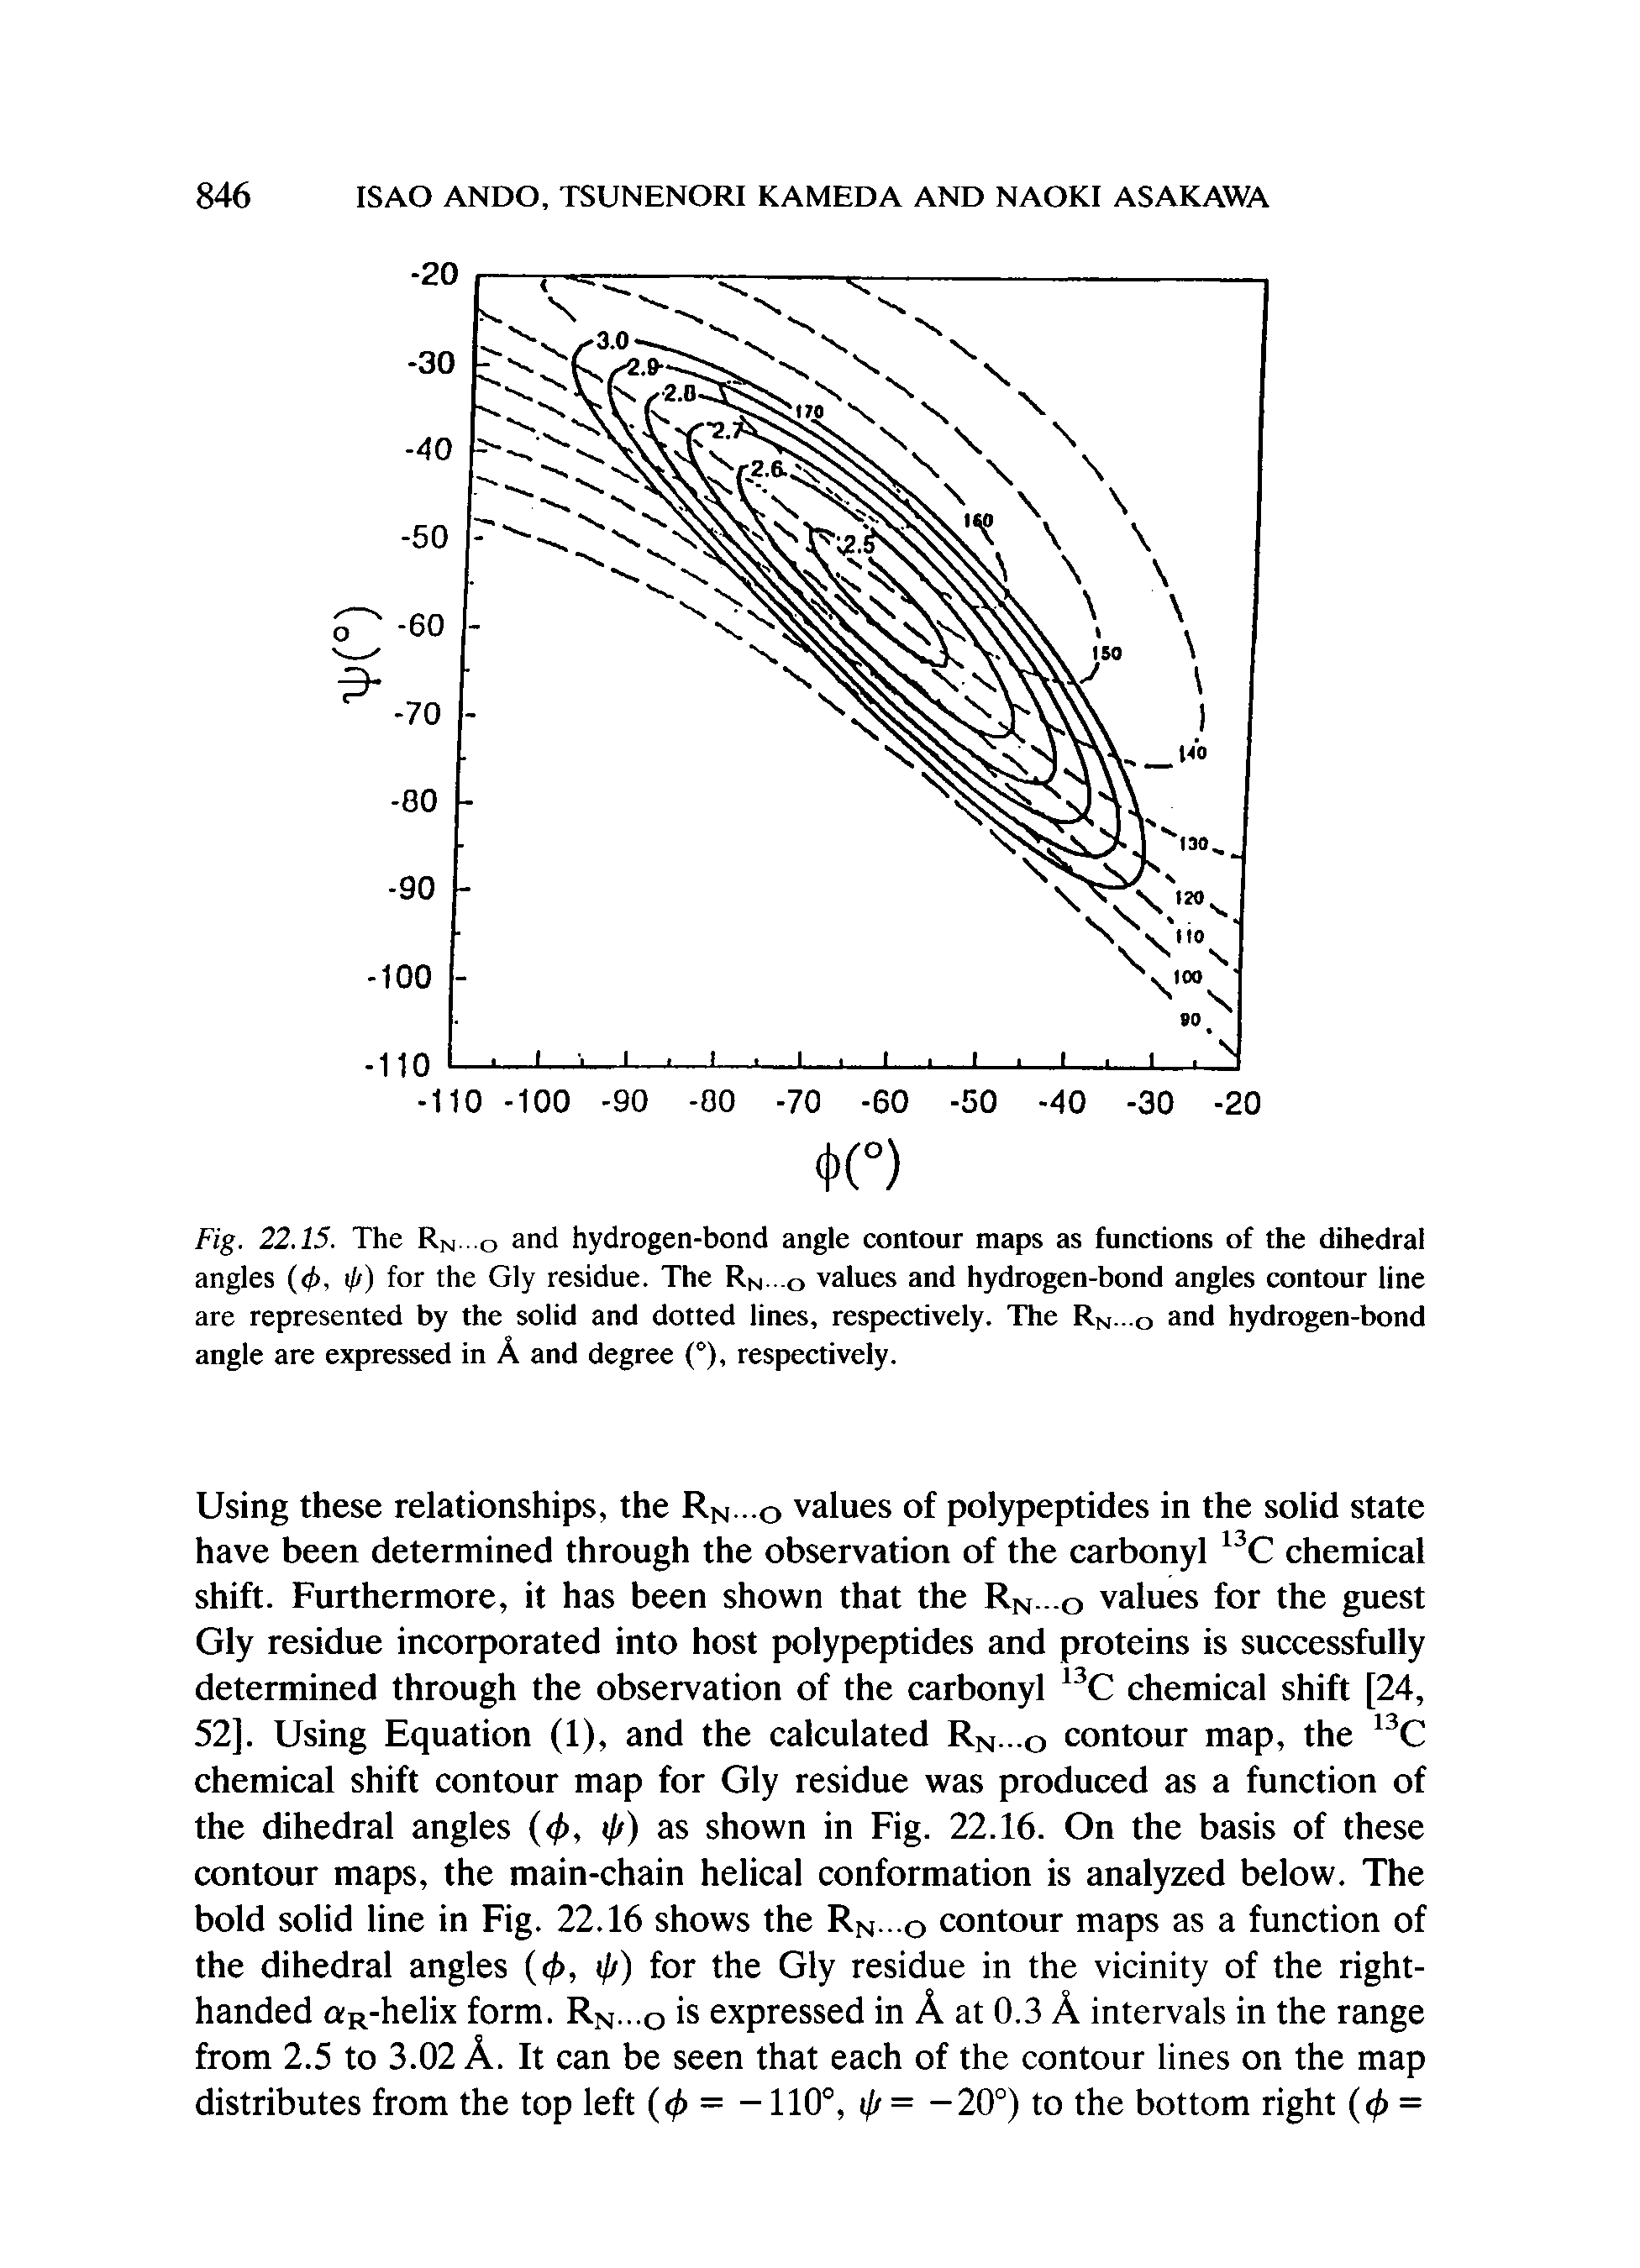 Fig. 22.15. The Rn o and hydrogen-bond angle contour maps as functions of the dihedral angles (4>, ifi) for the Gly residue. The Rn o values and hydrogen-bond angles contour line are represented by the solid and dotted lines, respectively. The Rn -o and hydrogen-bond angle are expressed in A and degree (°), respectively.